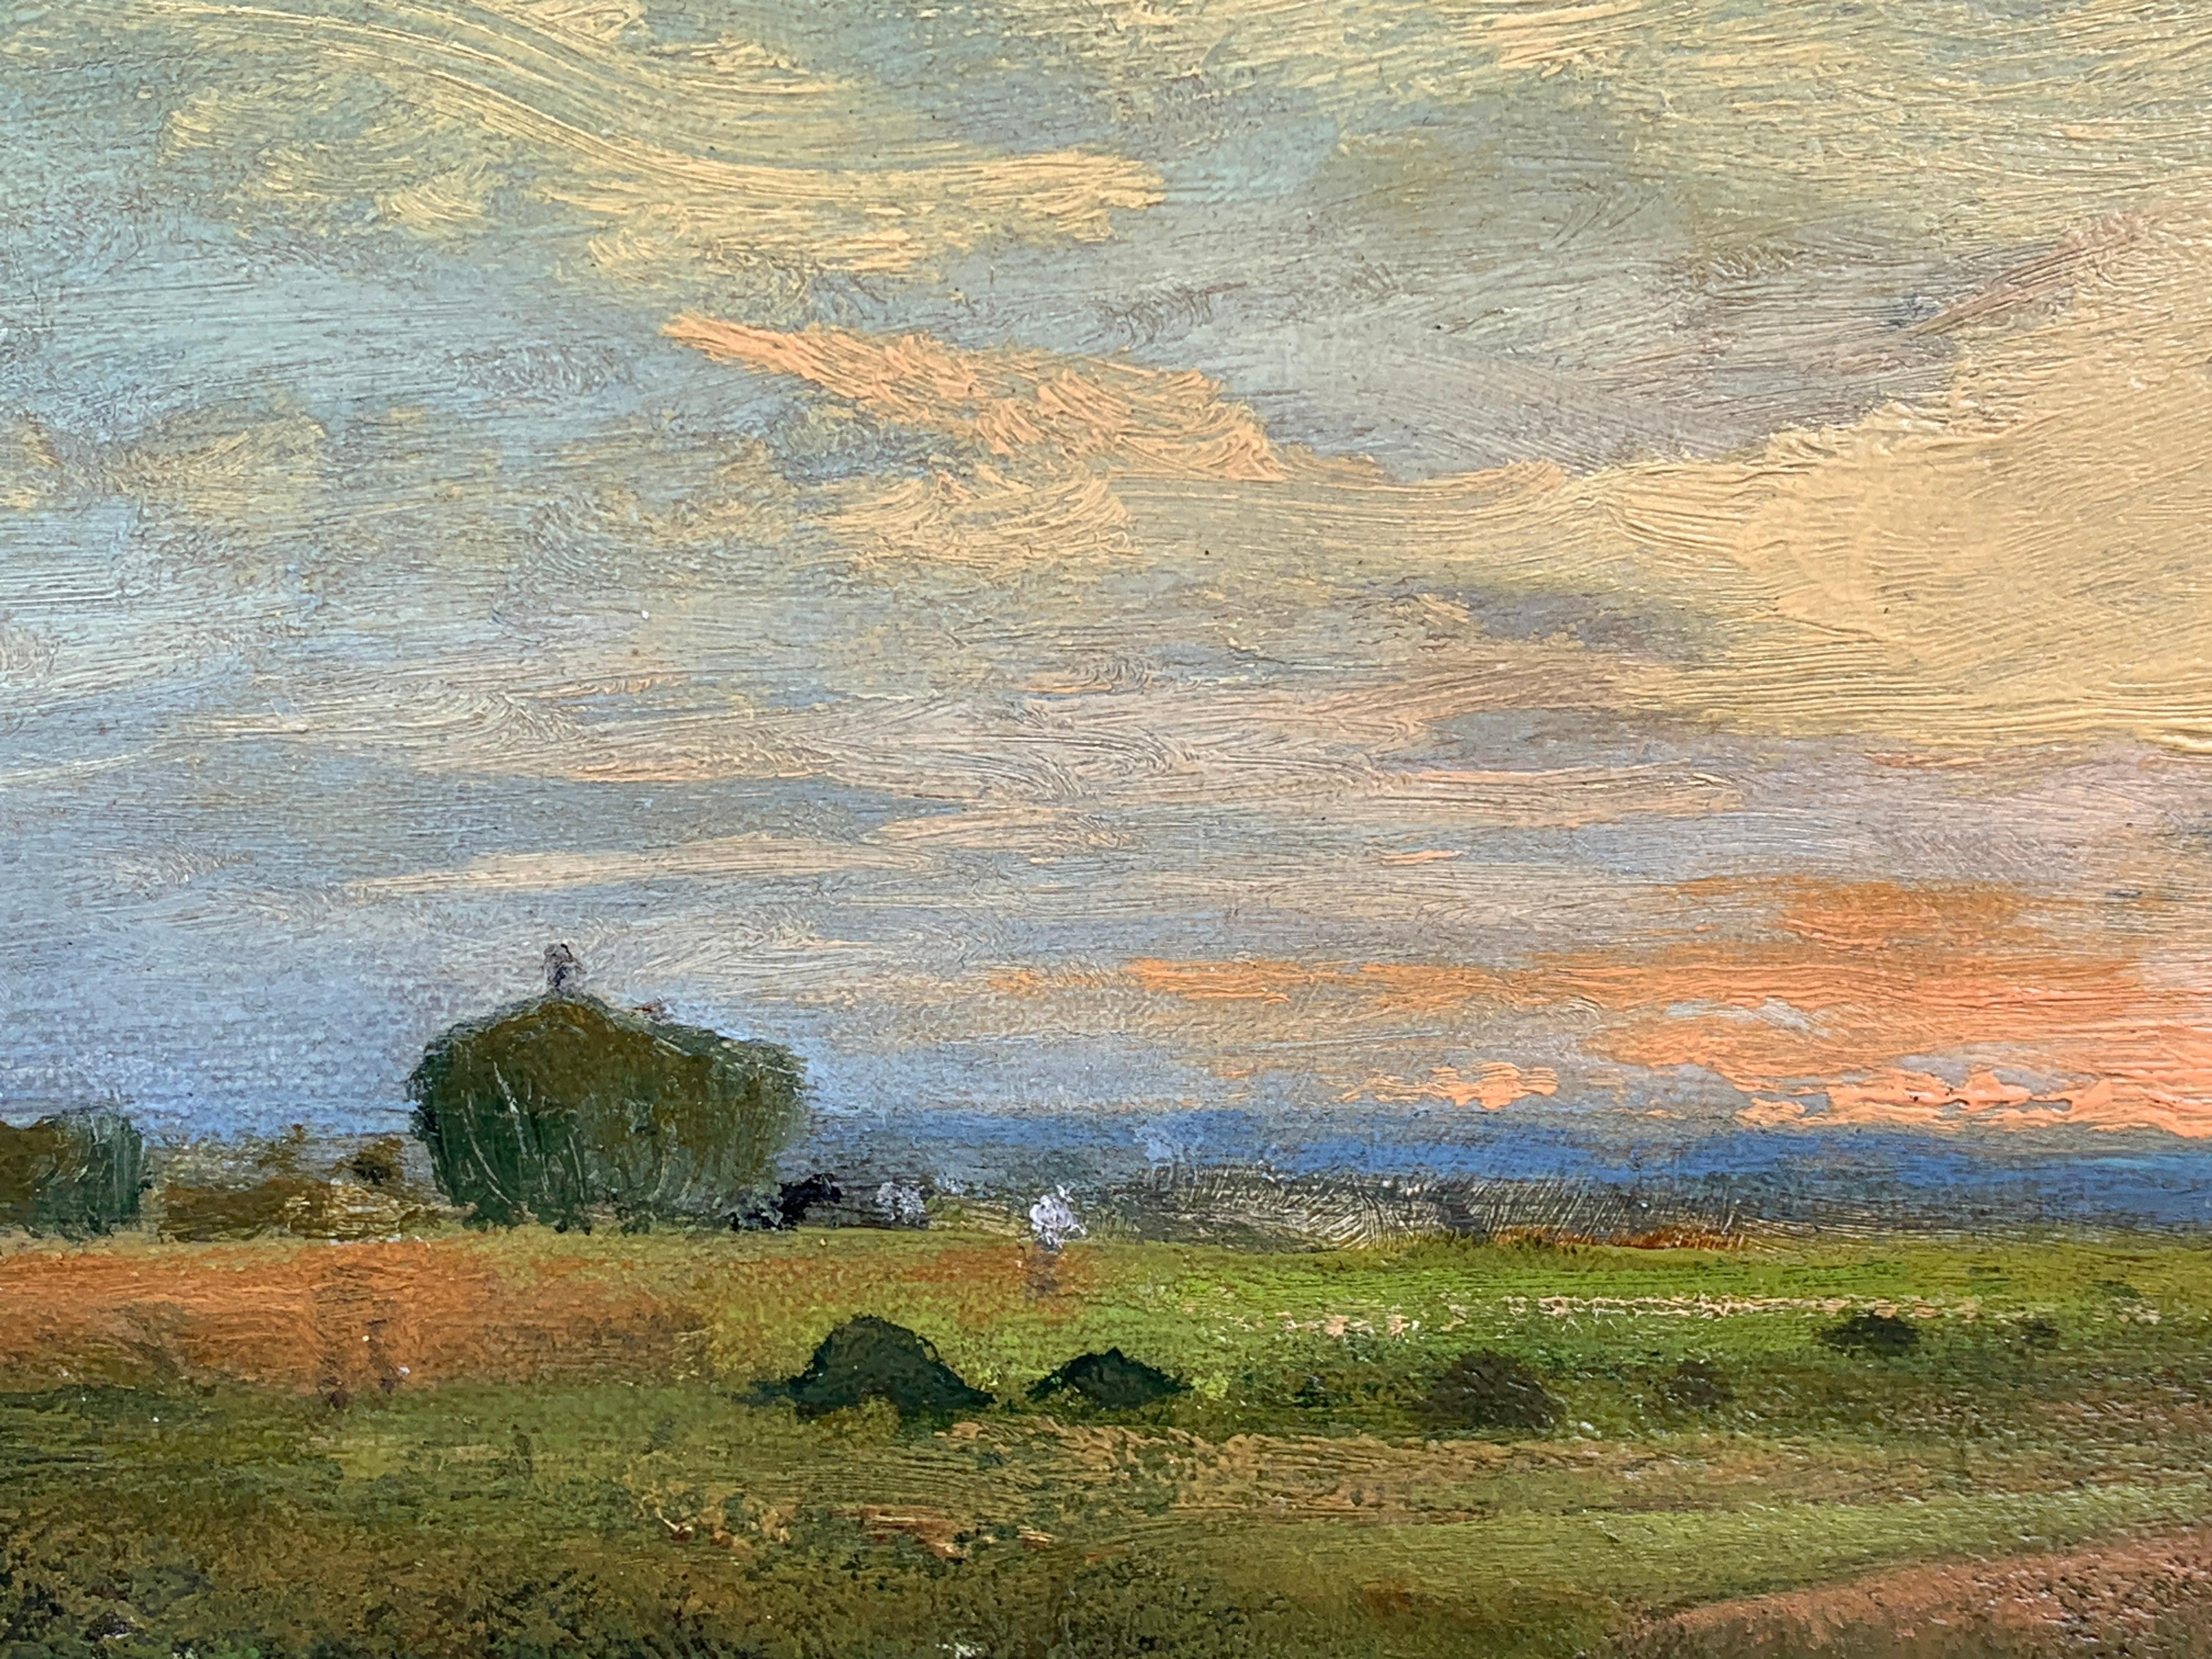 19th century French Impressionist landscape, with abstract like sky.
A wonderful and well painted late 19th-century French impressionist landscape.

This picture has all the quality and subtlety of a late 19th-century French impressionist inspired